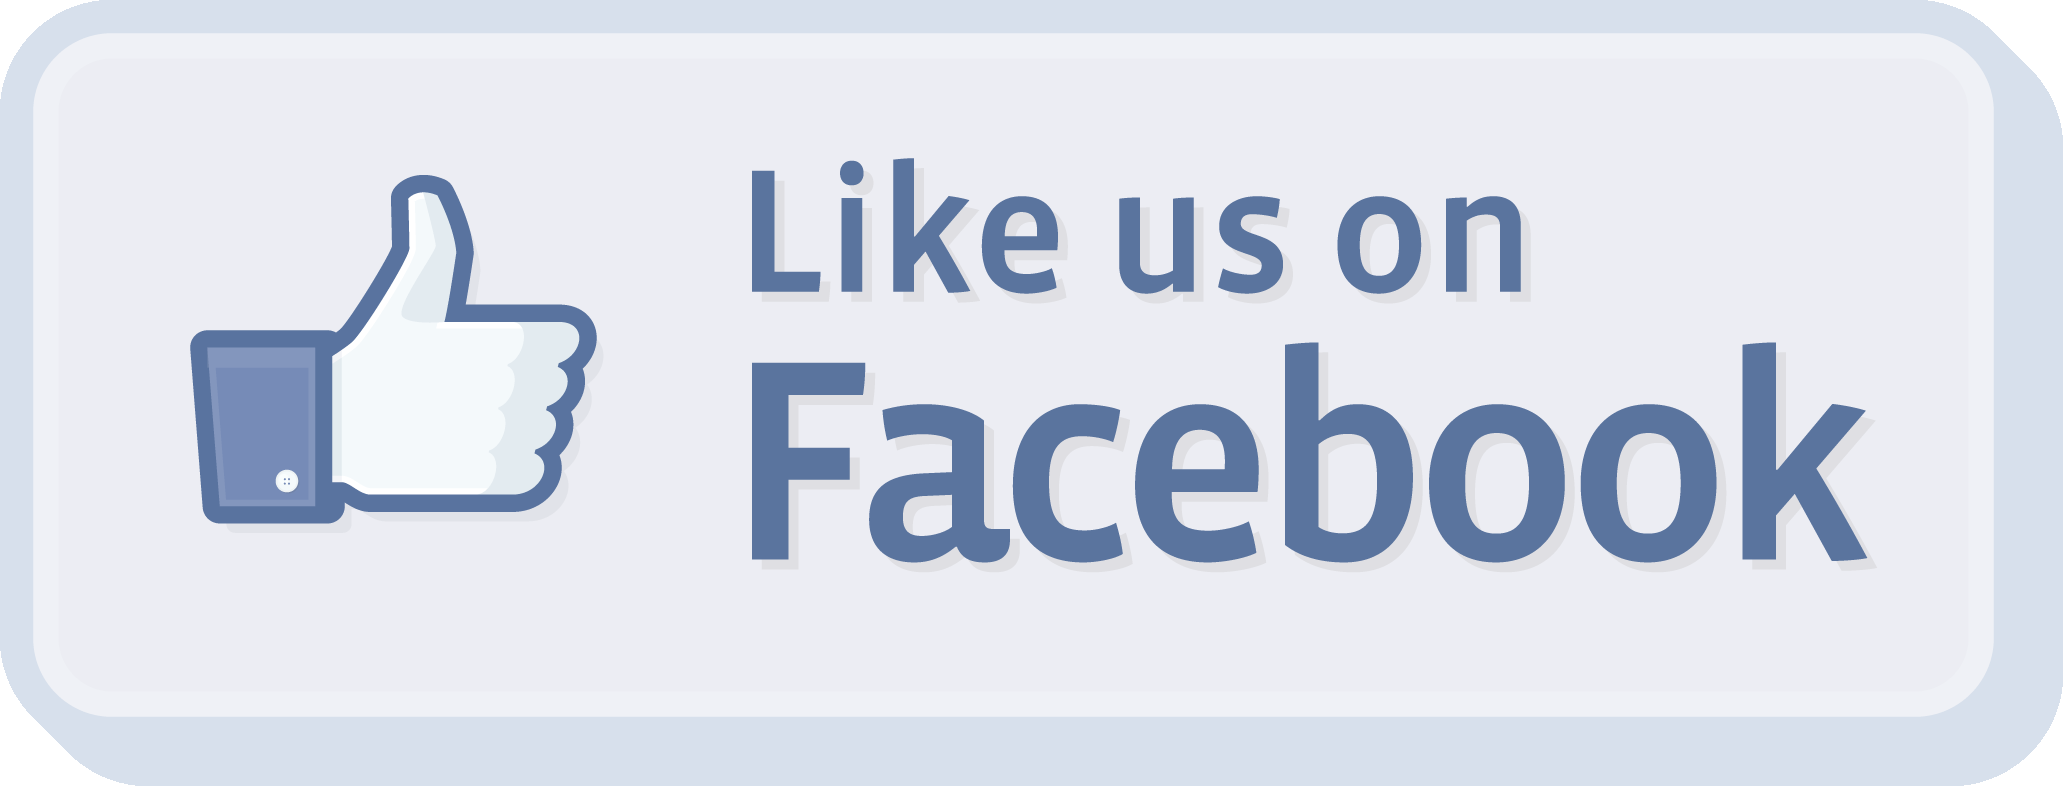 Find us on Facebook | CPS Technology Solutions